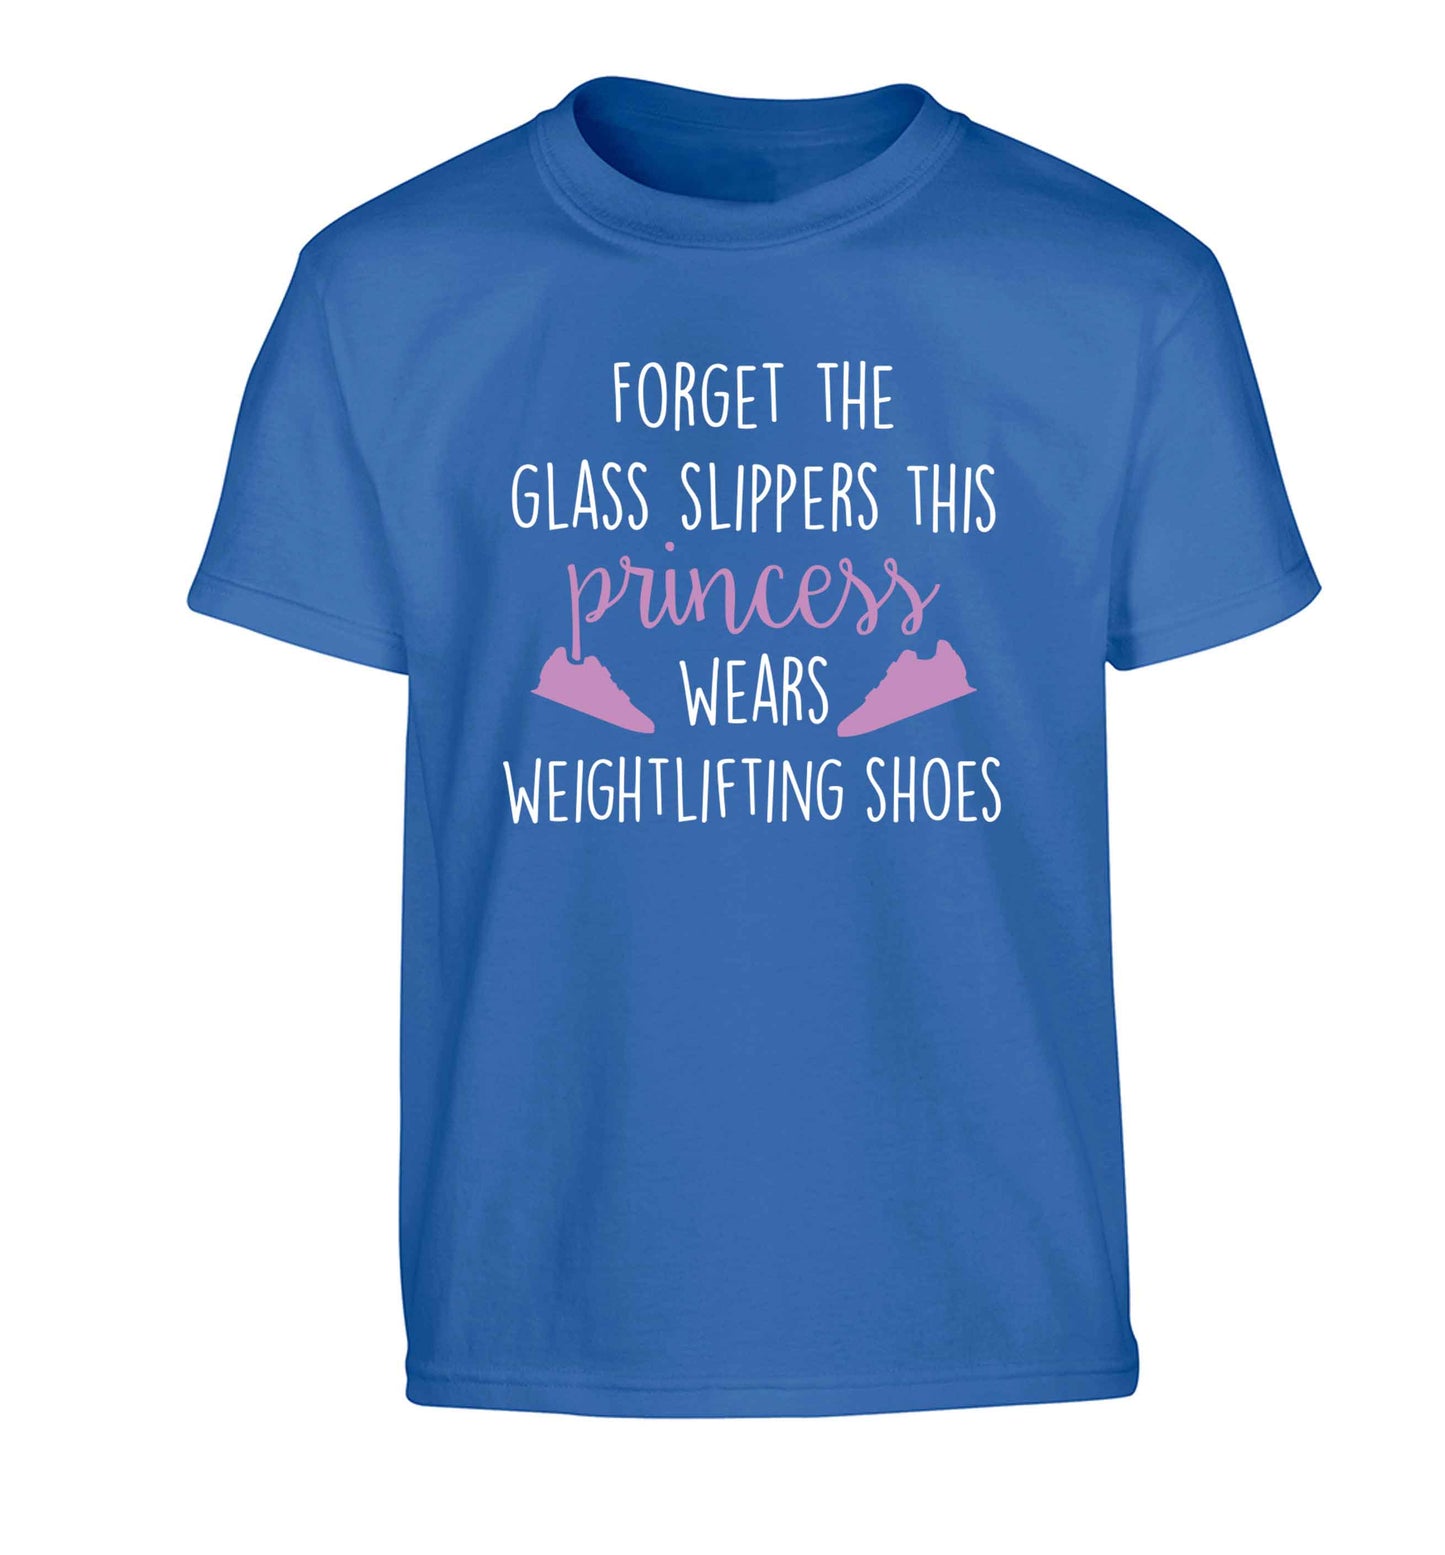 Forget the glass slippers this princess wears weightlifting shoes Children's blue Tshirt 12-13 Years